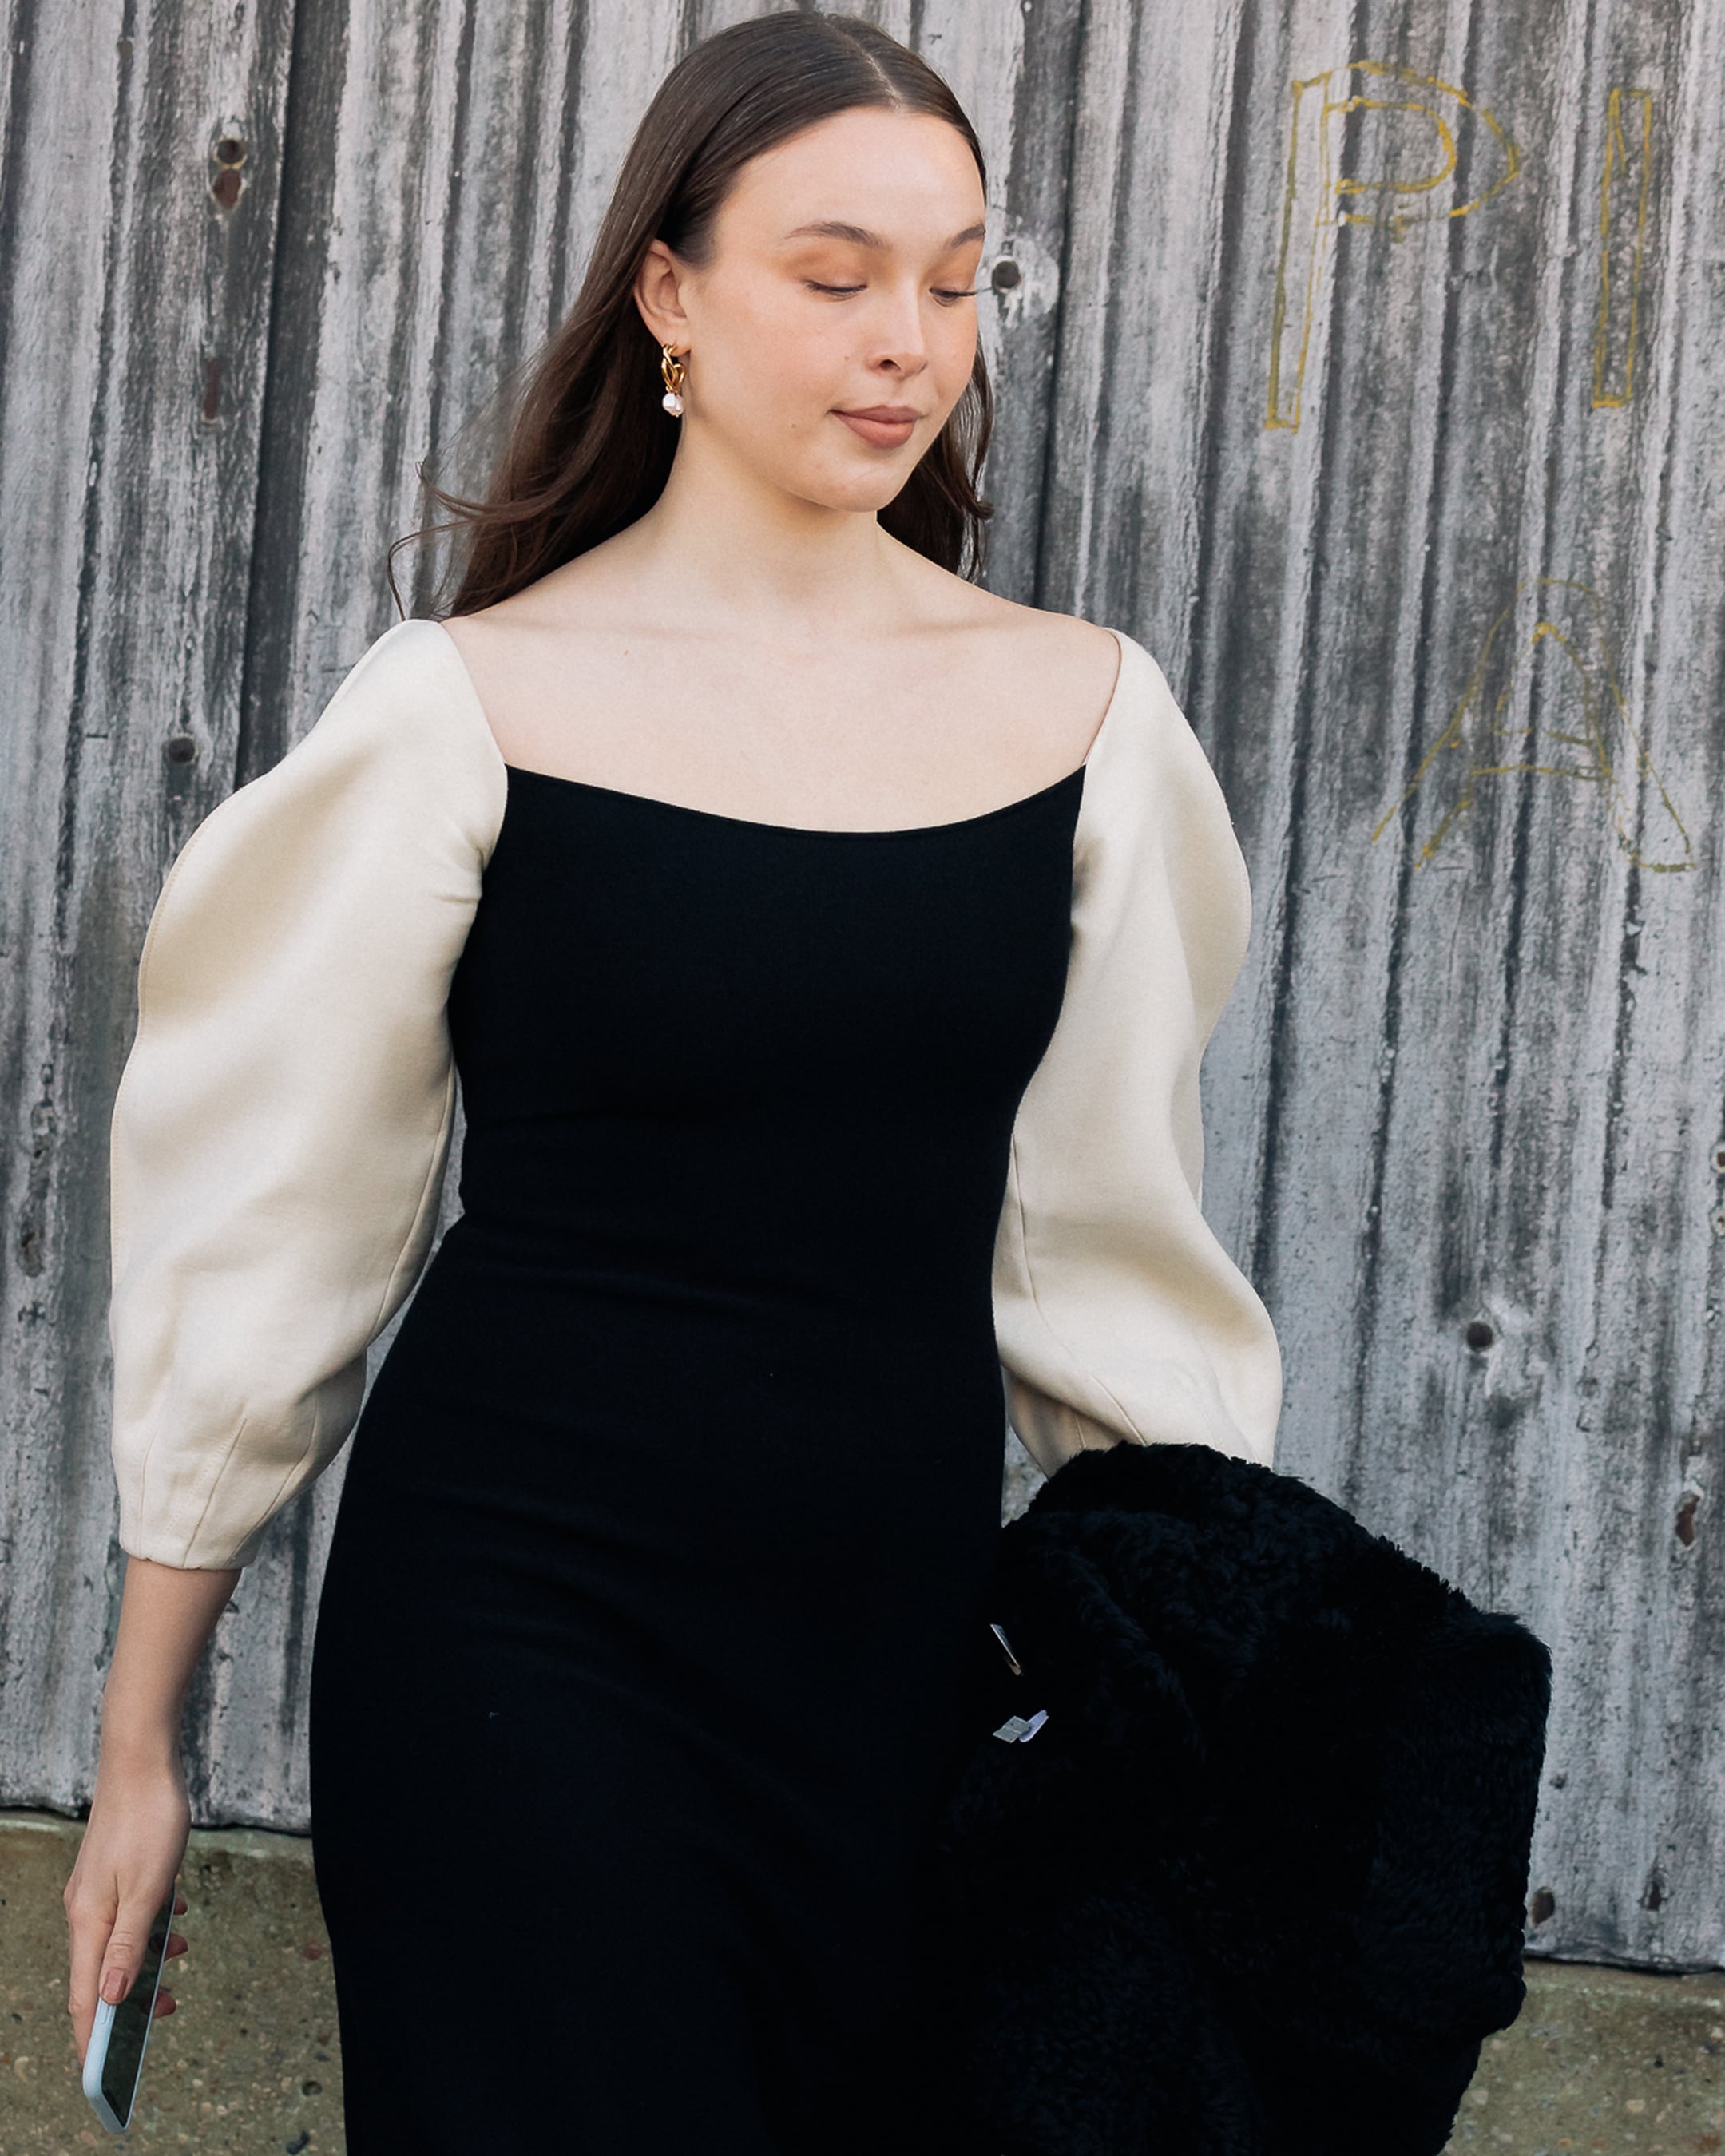 Winter Pregnancy Months Are No Hassle with These Formal Outfit Ideas